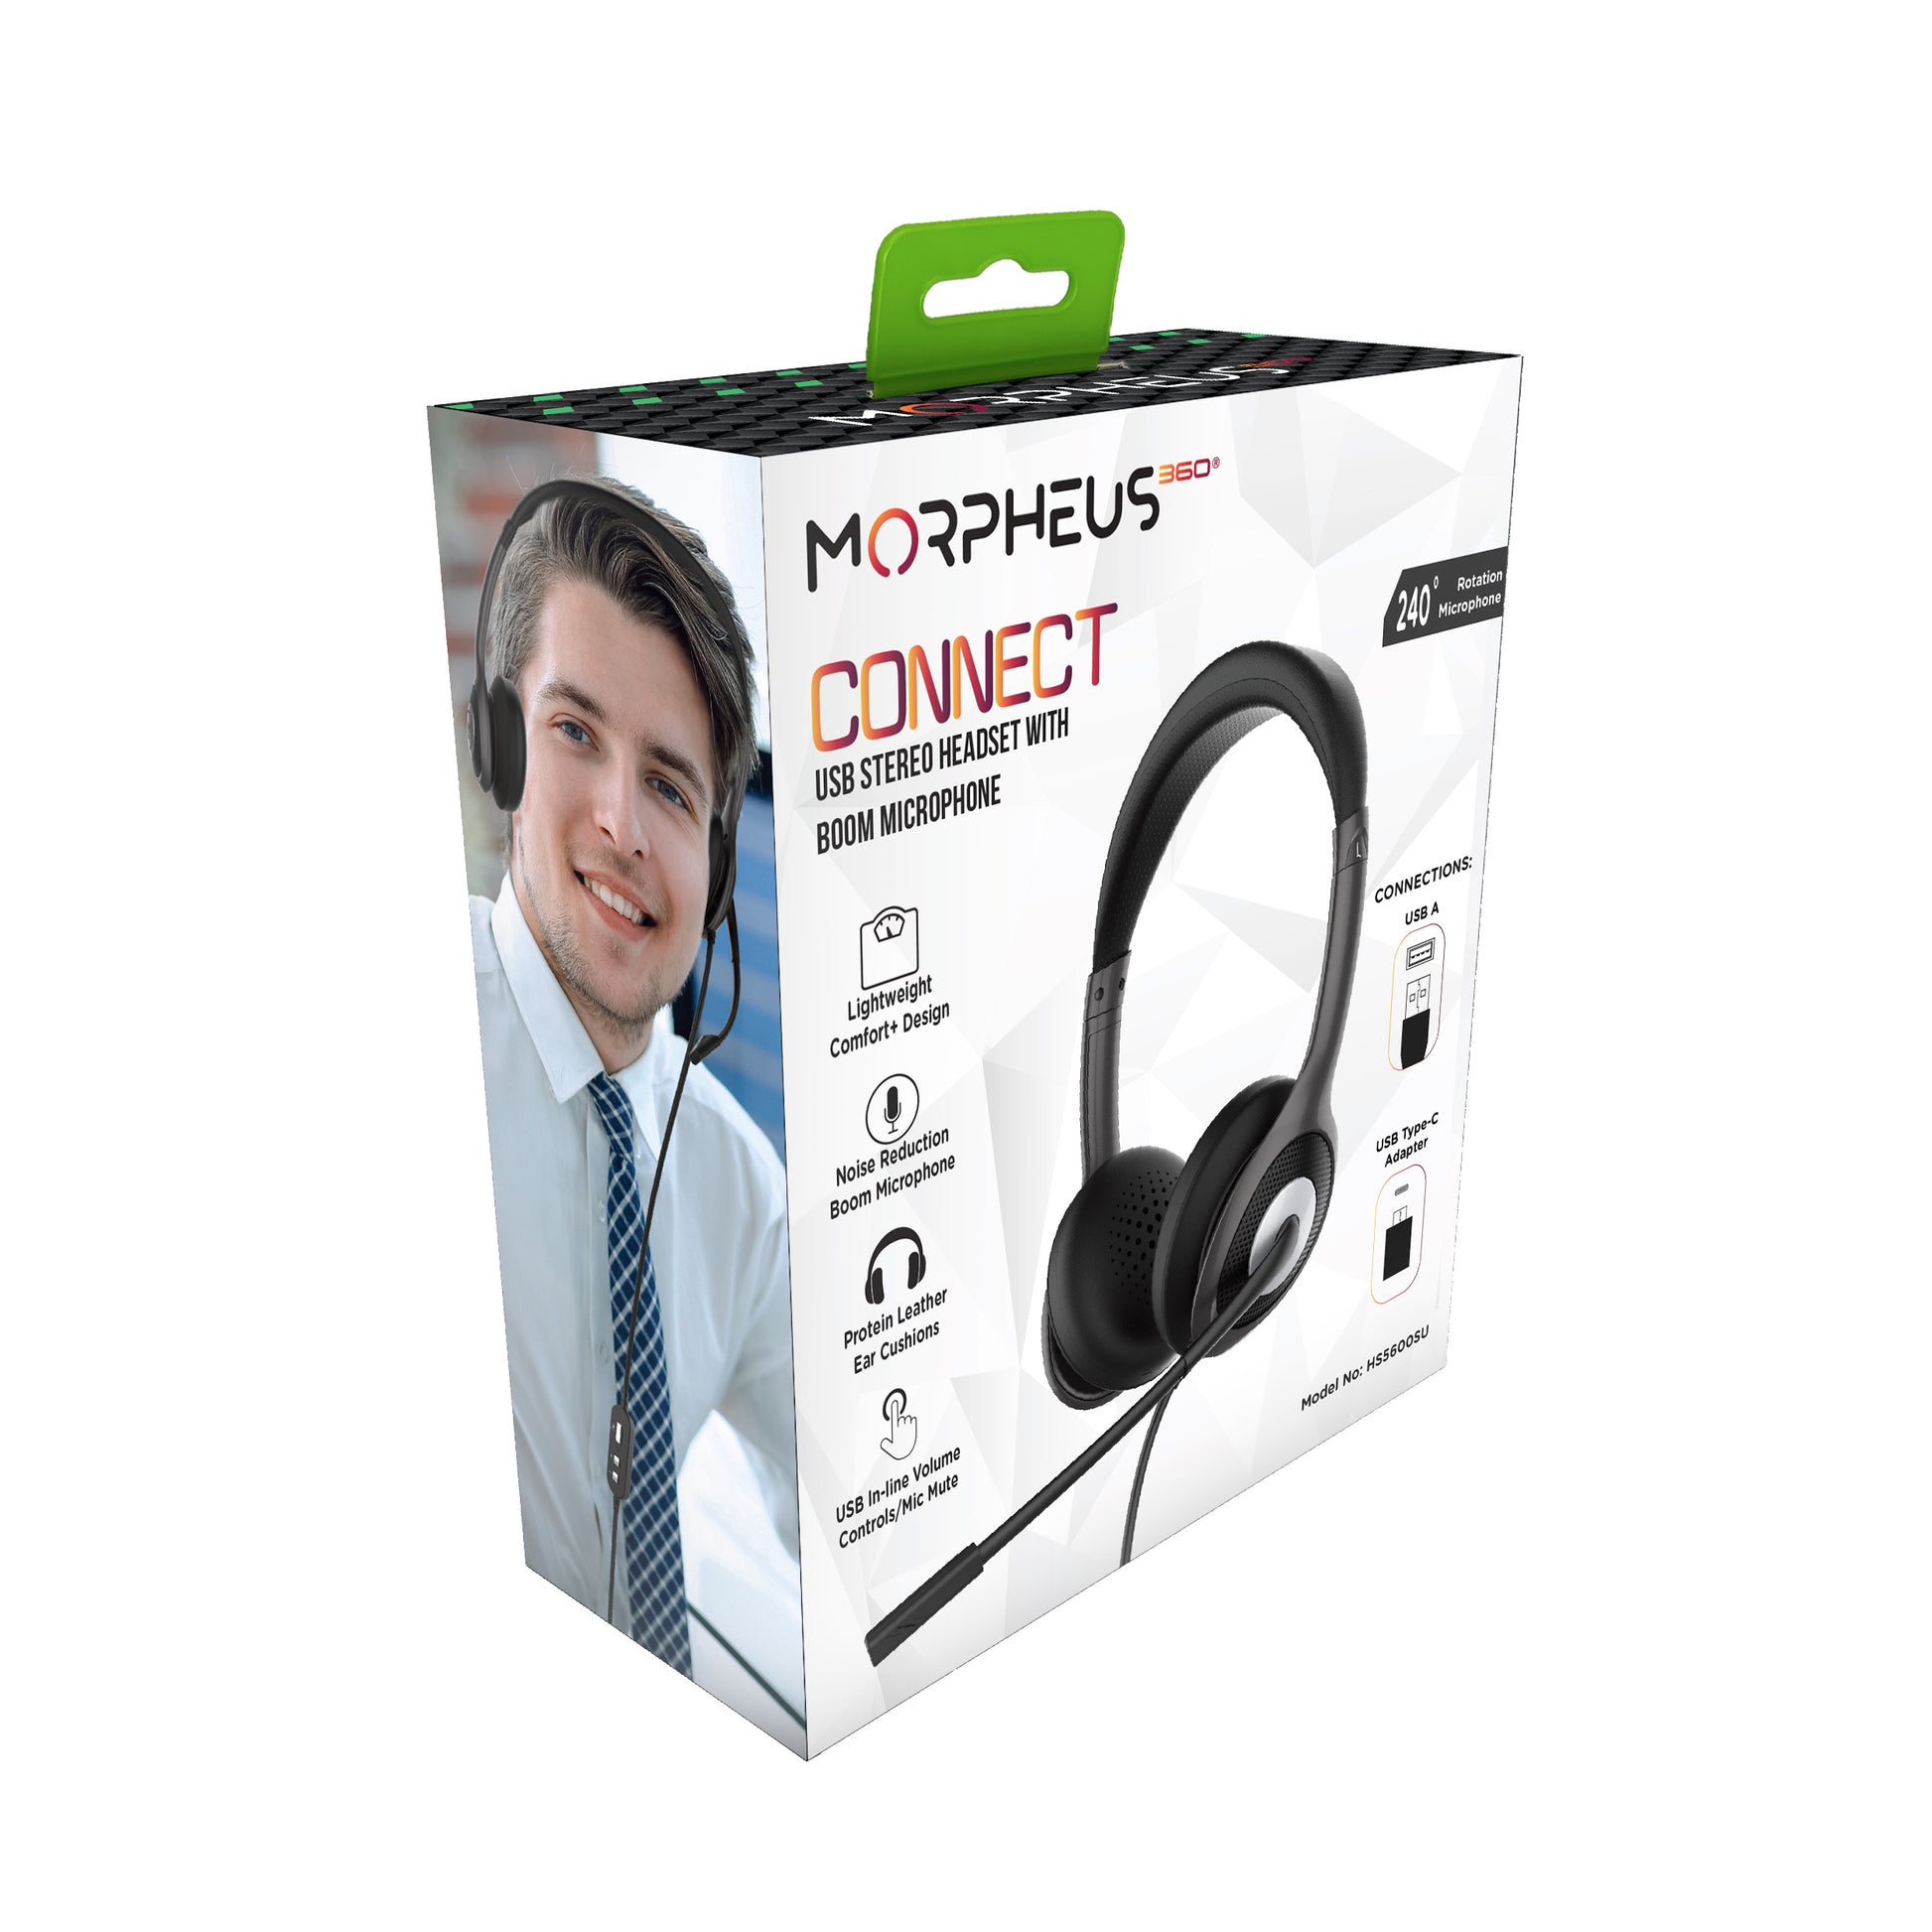 Luske Måge Mentalt Morpheus 360 Connect USB Stereo Headset with Boom Microphone - Noise R –  www.morpheus360.com